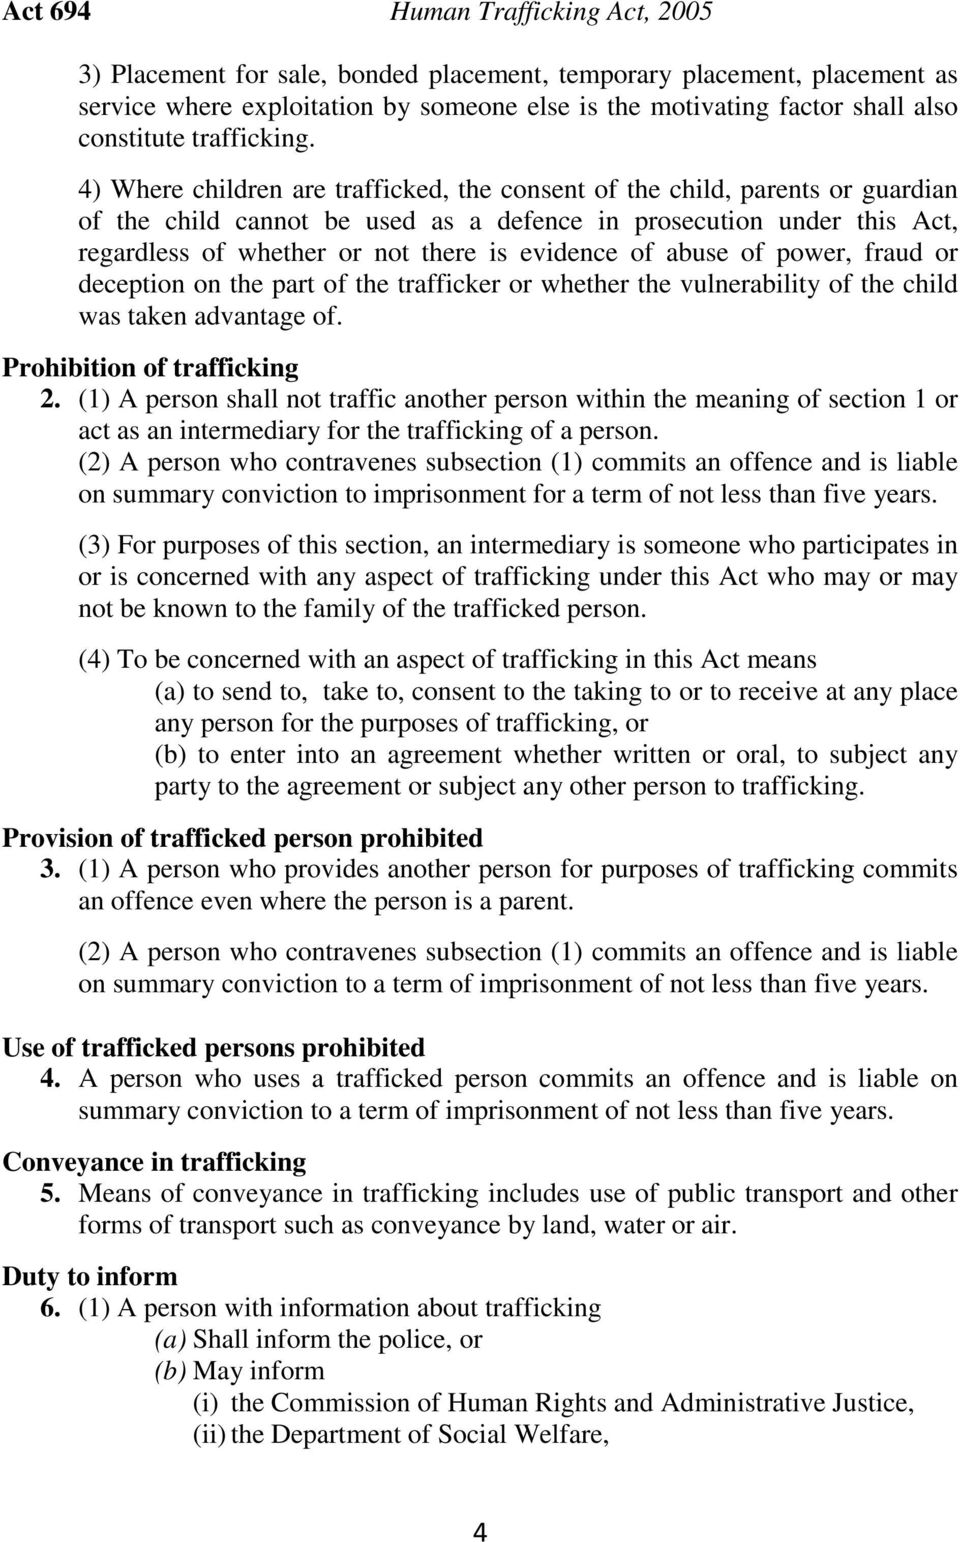 4) Where children are trafficked, the consent of the child, parents or guardian of the child cannot be used as a defence in prosecution under this Act, regardless of whether or not there is evidence